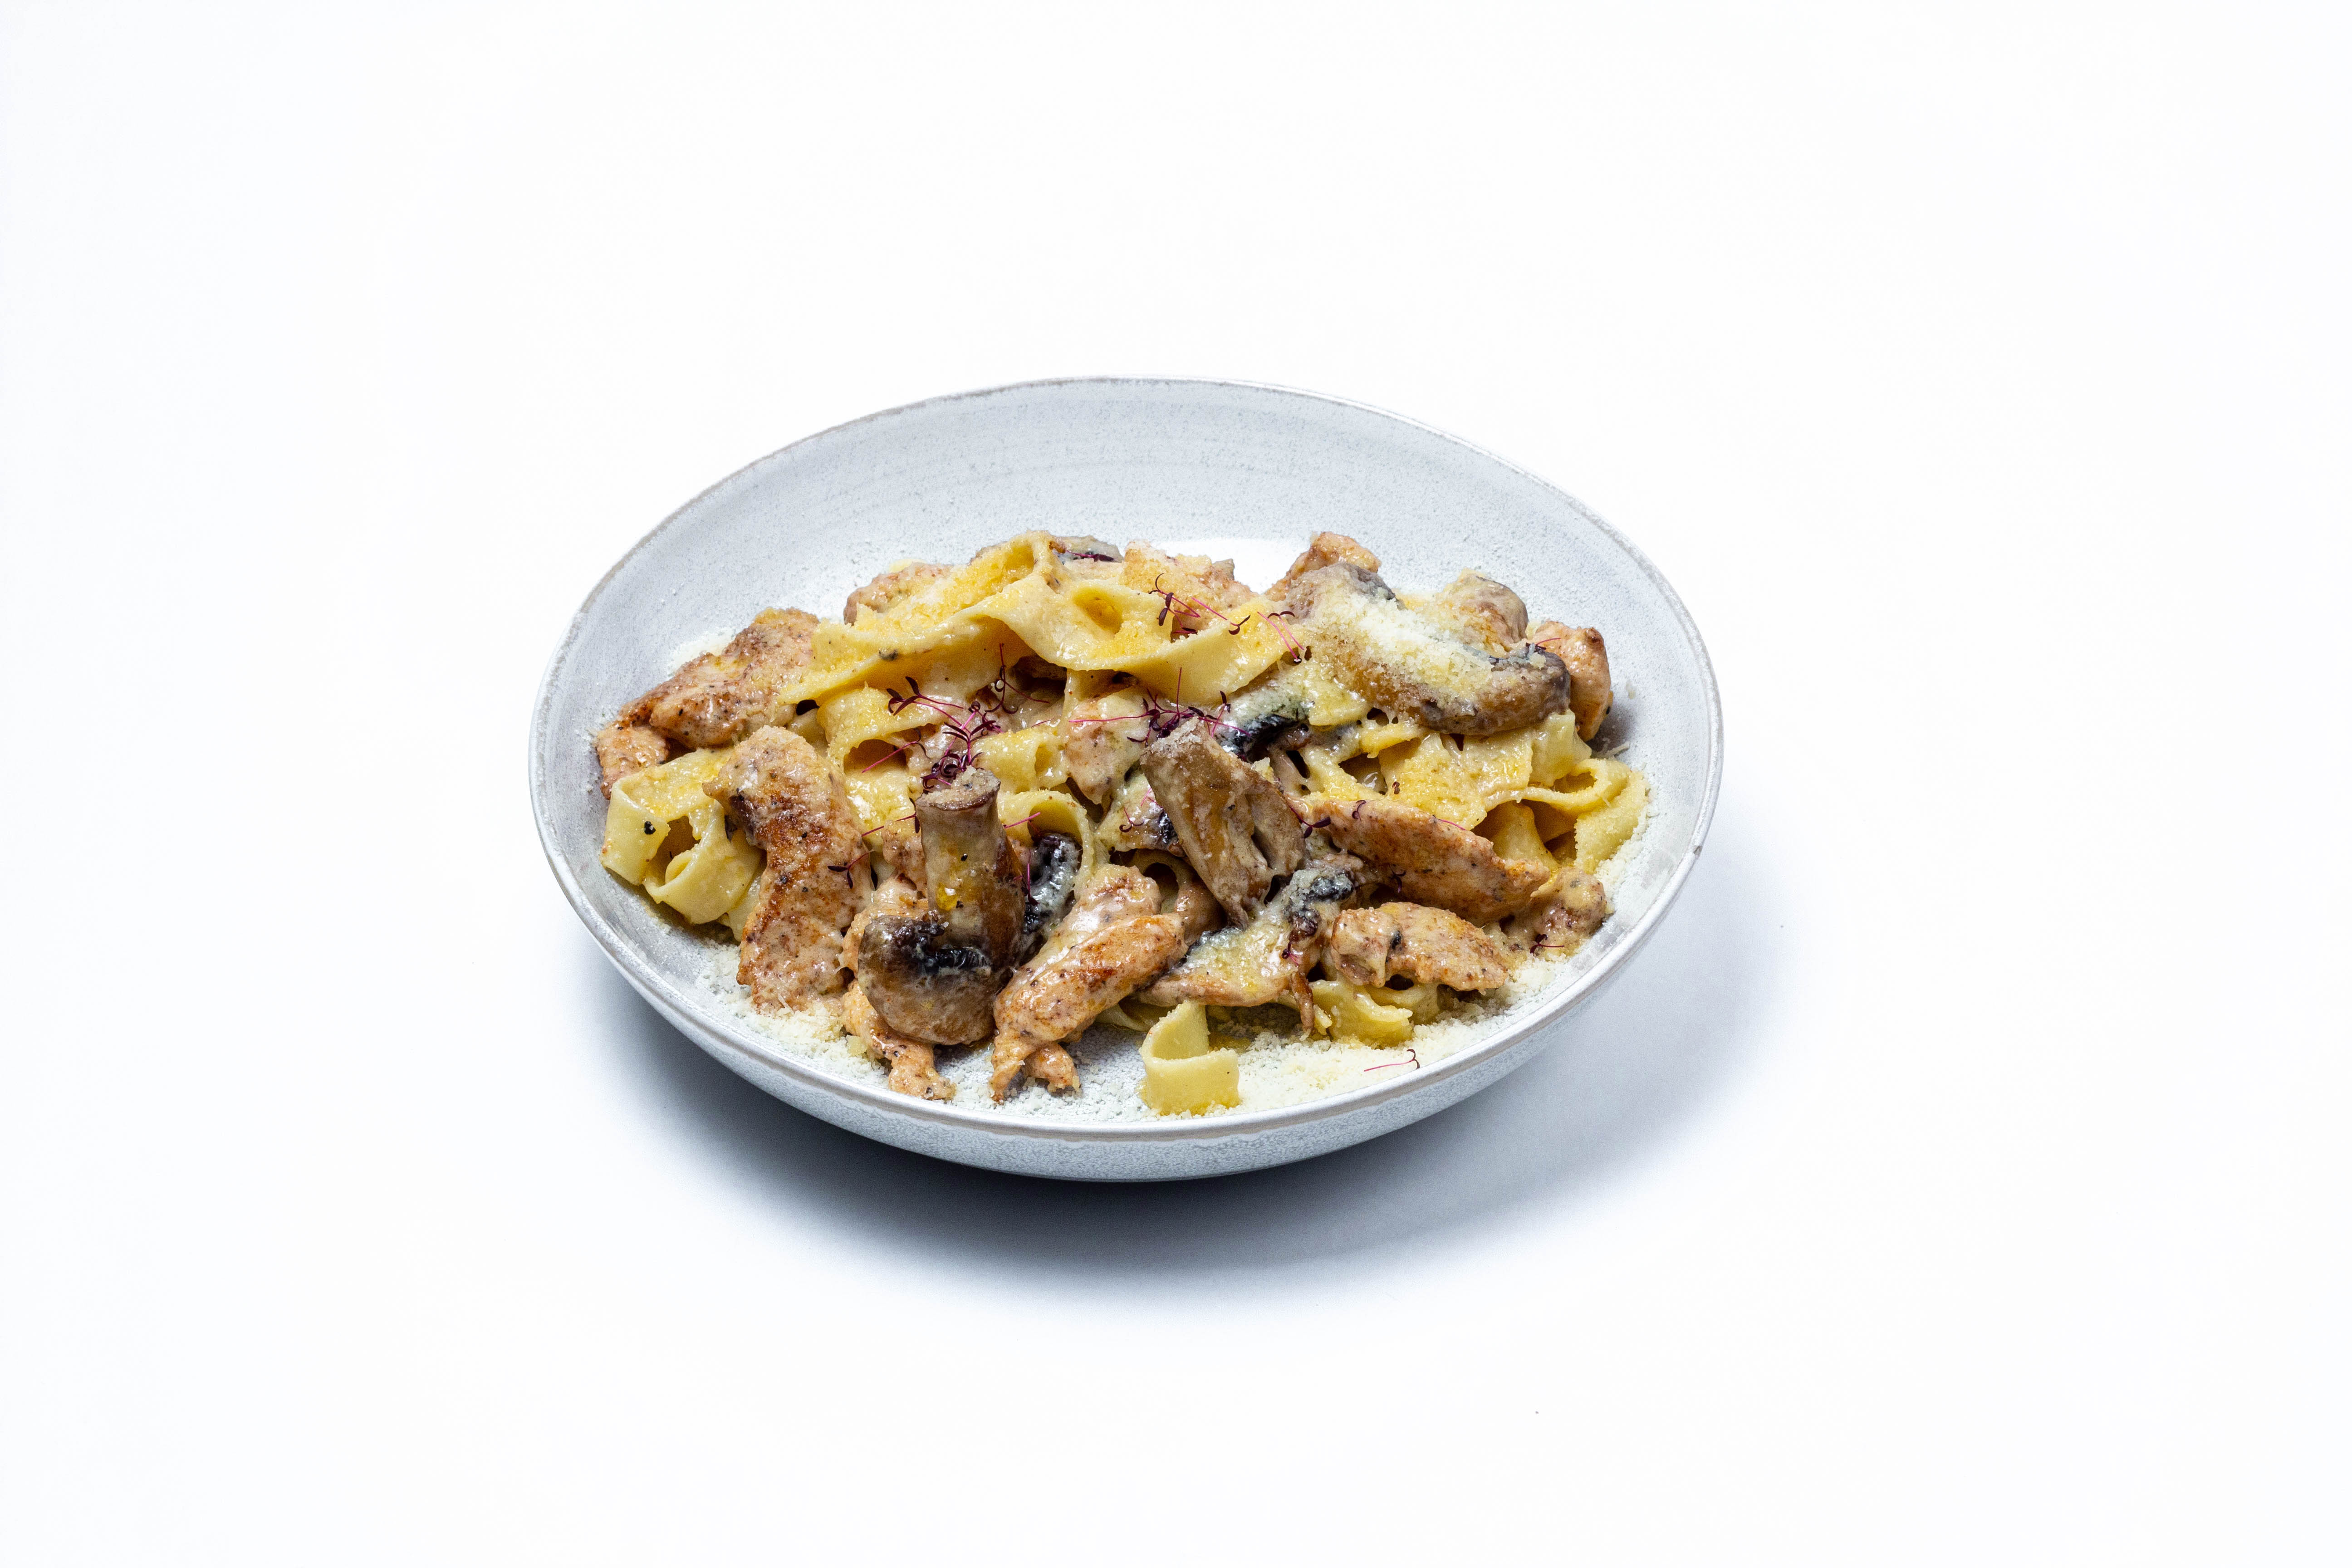 Fettuccine with chicken and mushrooms in a creamy sauce